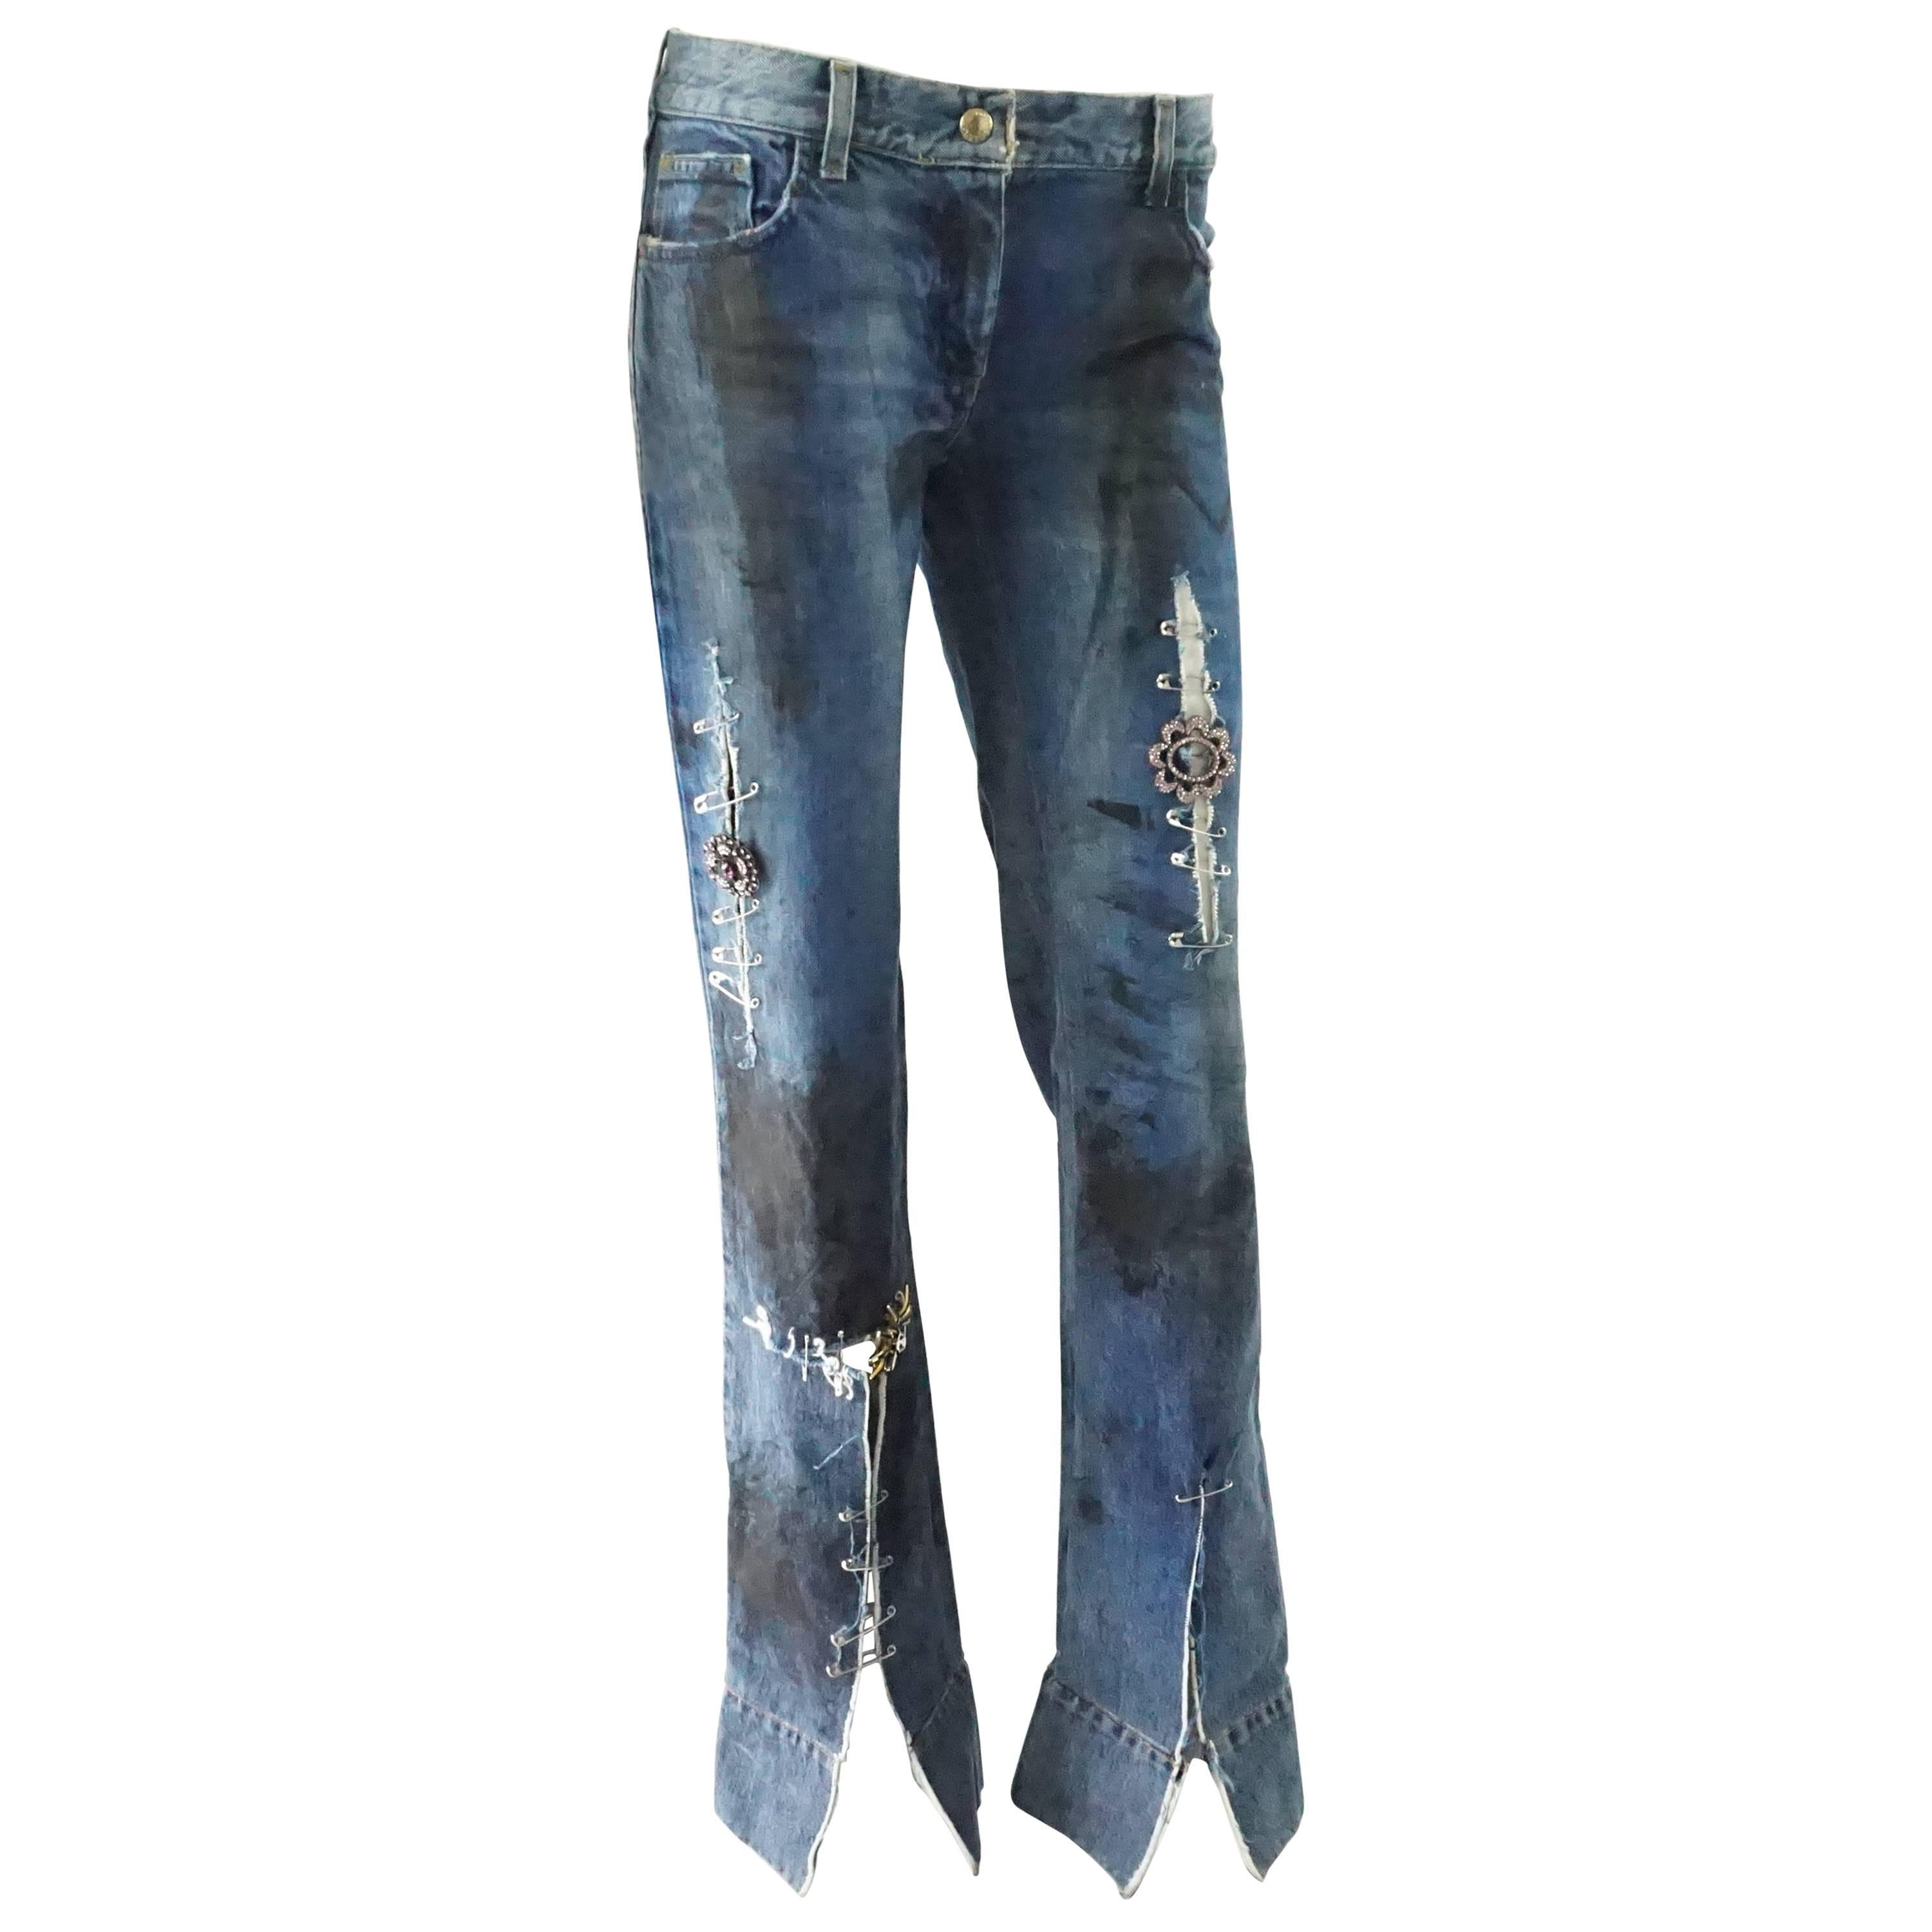 Dolce & Gabbana Ripped Grunge Jeans with Rhinestone Brooches - S